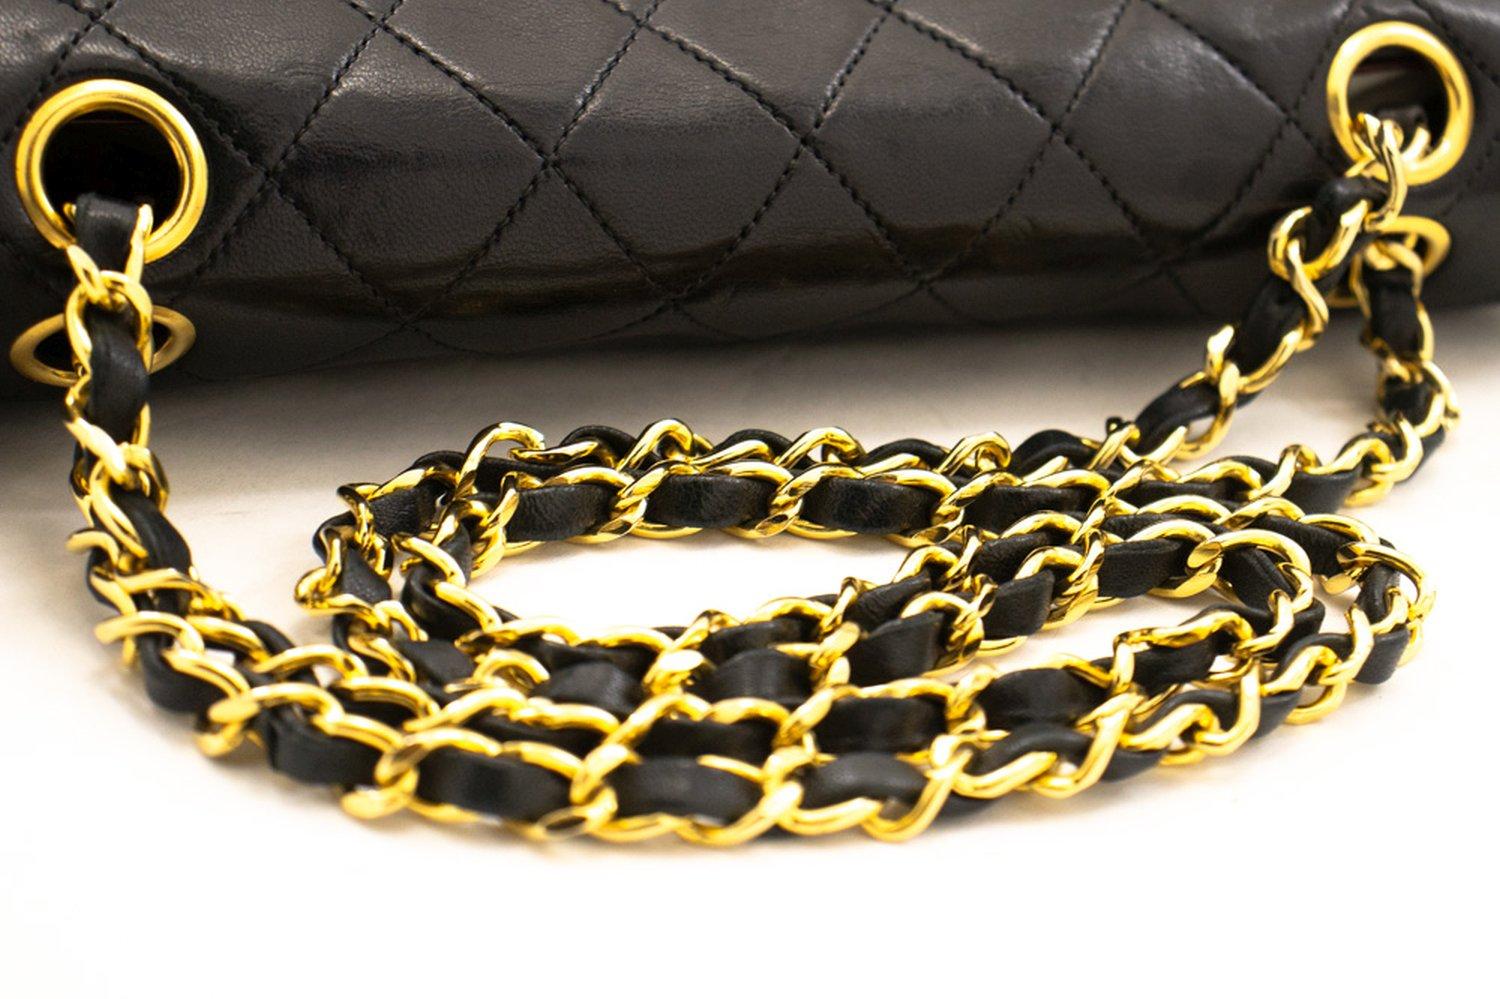 CHANEL Vintage Classic Chain Shoulder Bag Flap Quilted Lambskin 9